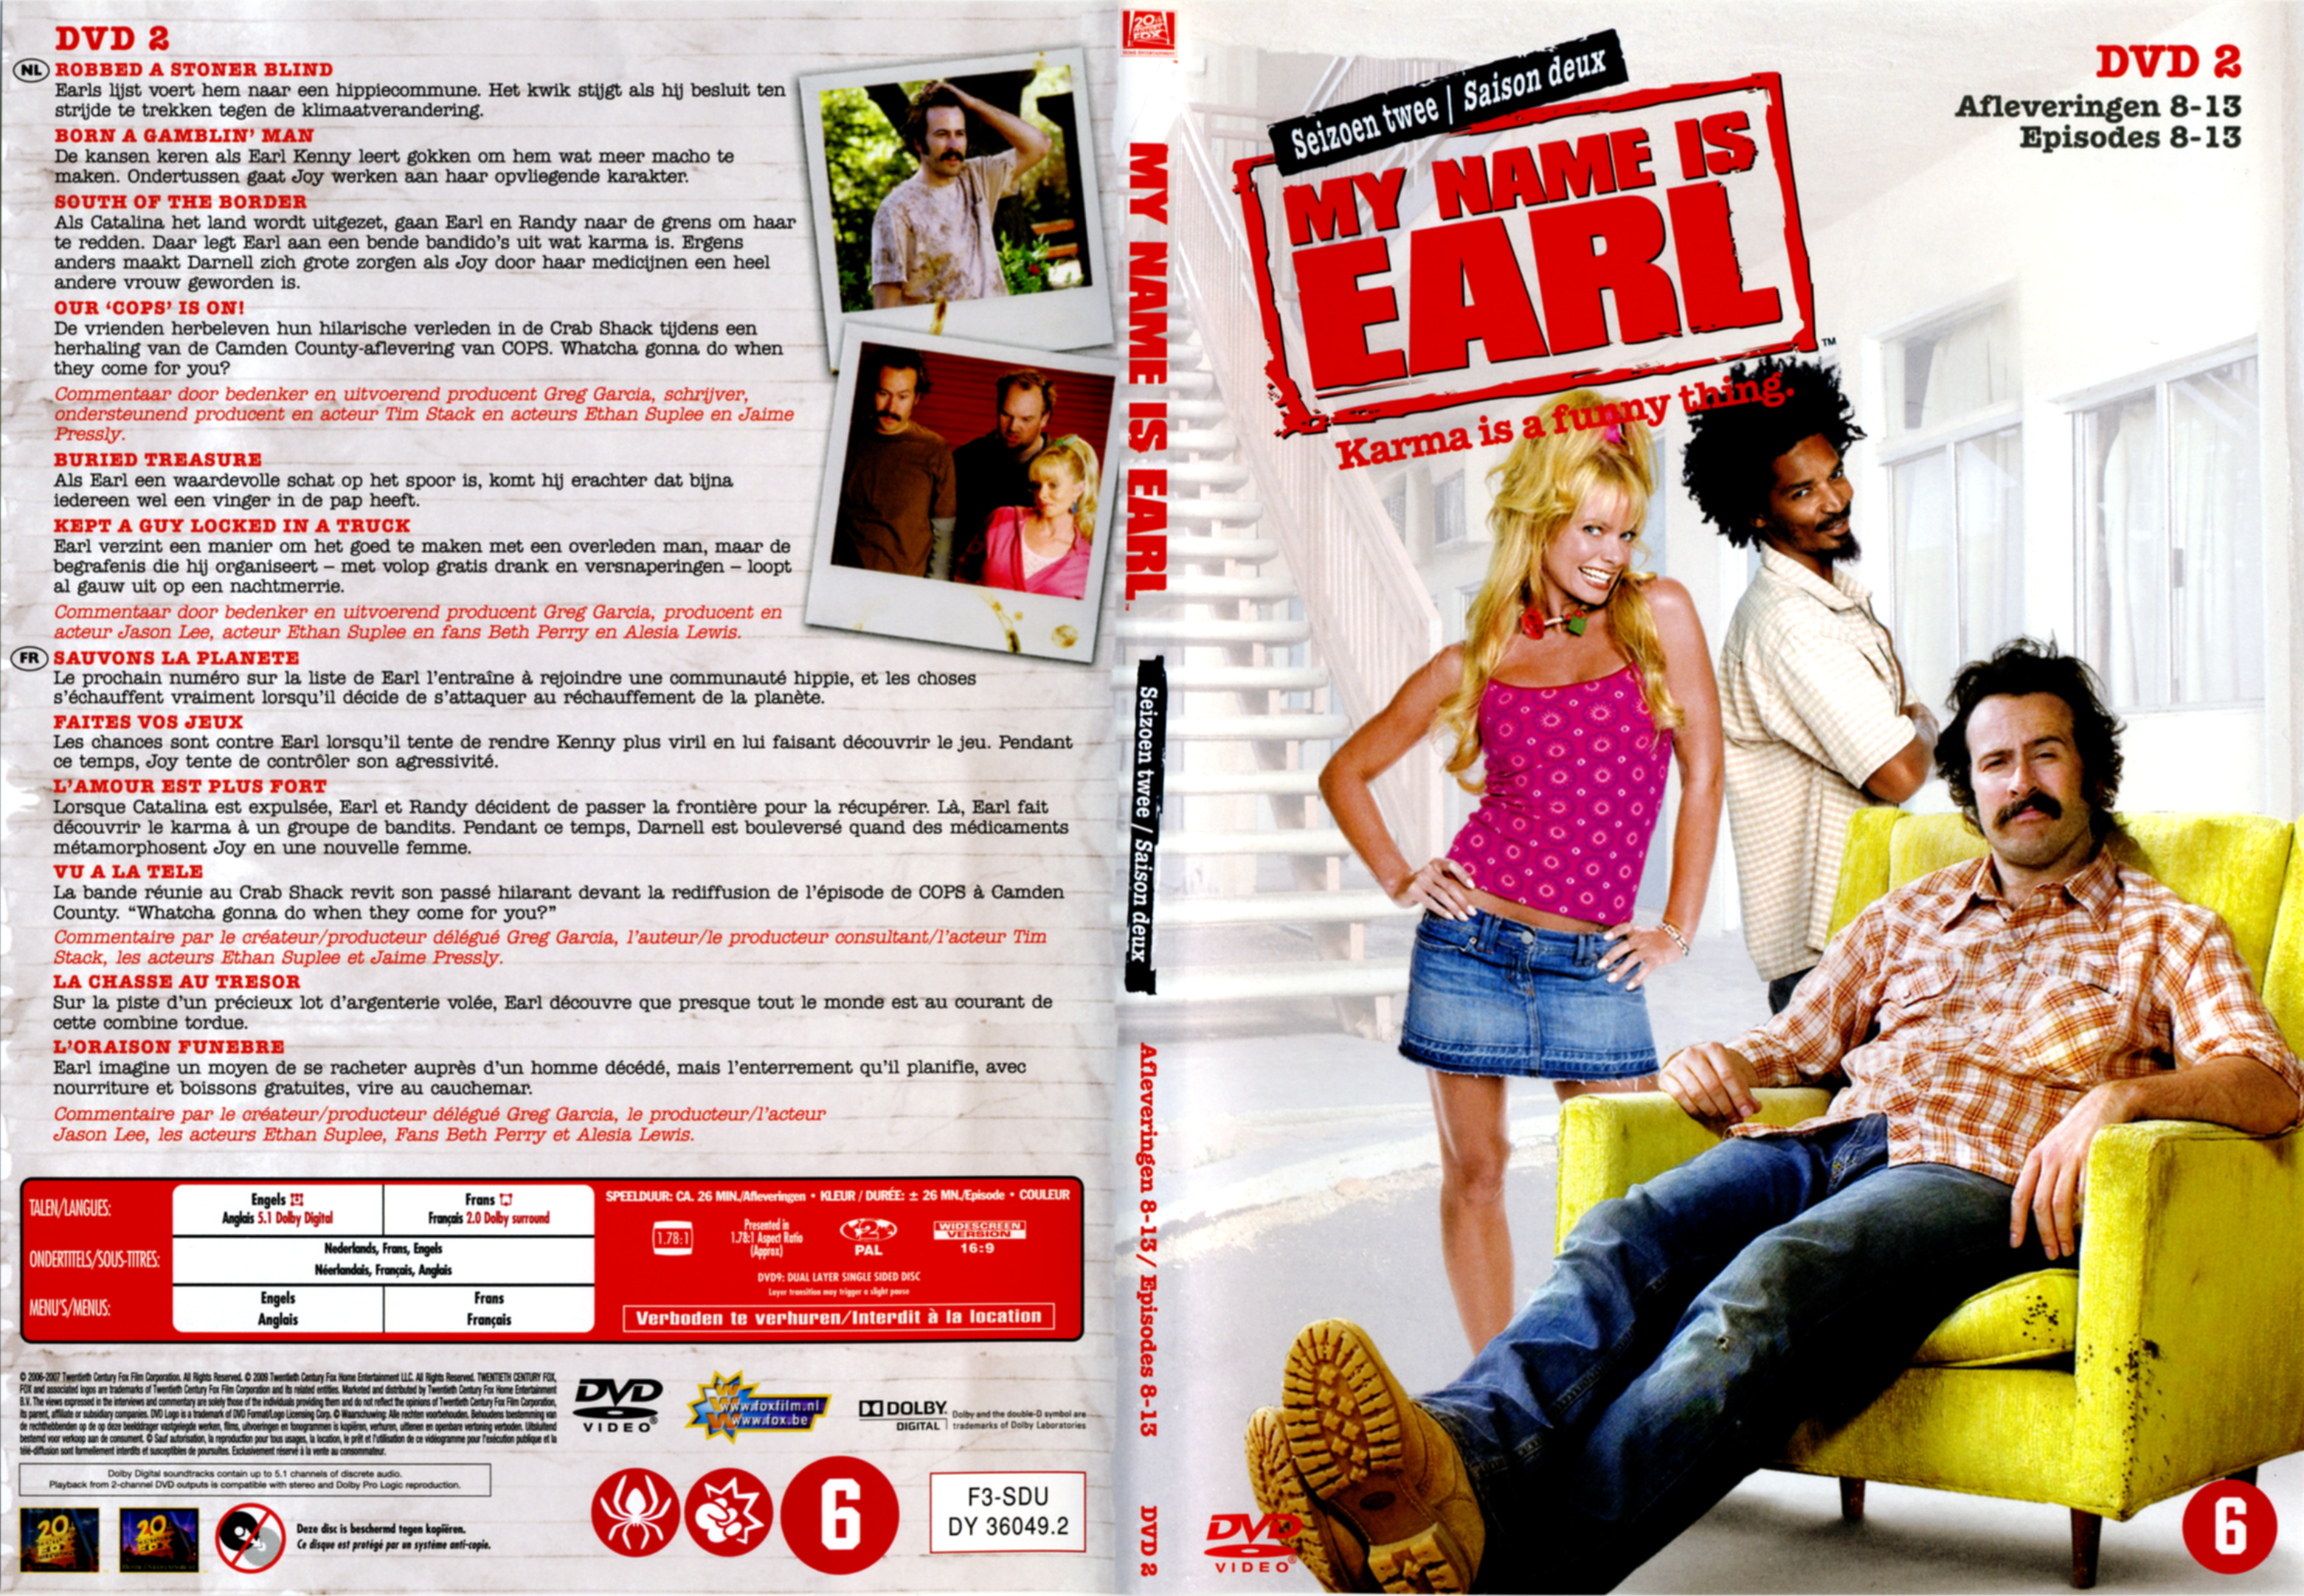 Jaquette DVD My name is Earl Saison 2 DVD 2